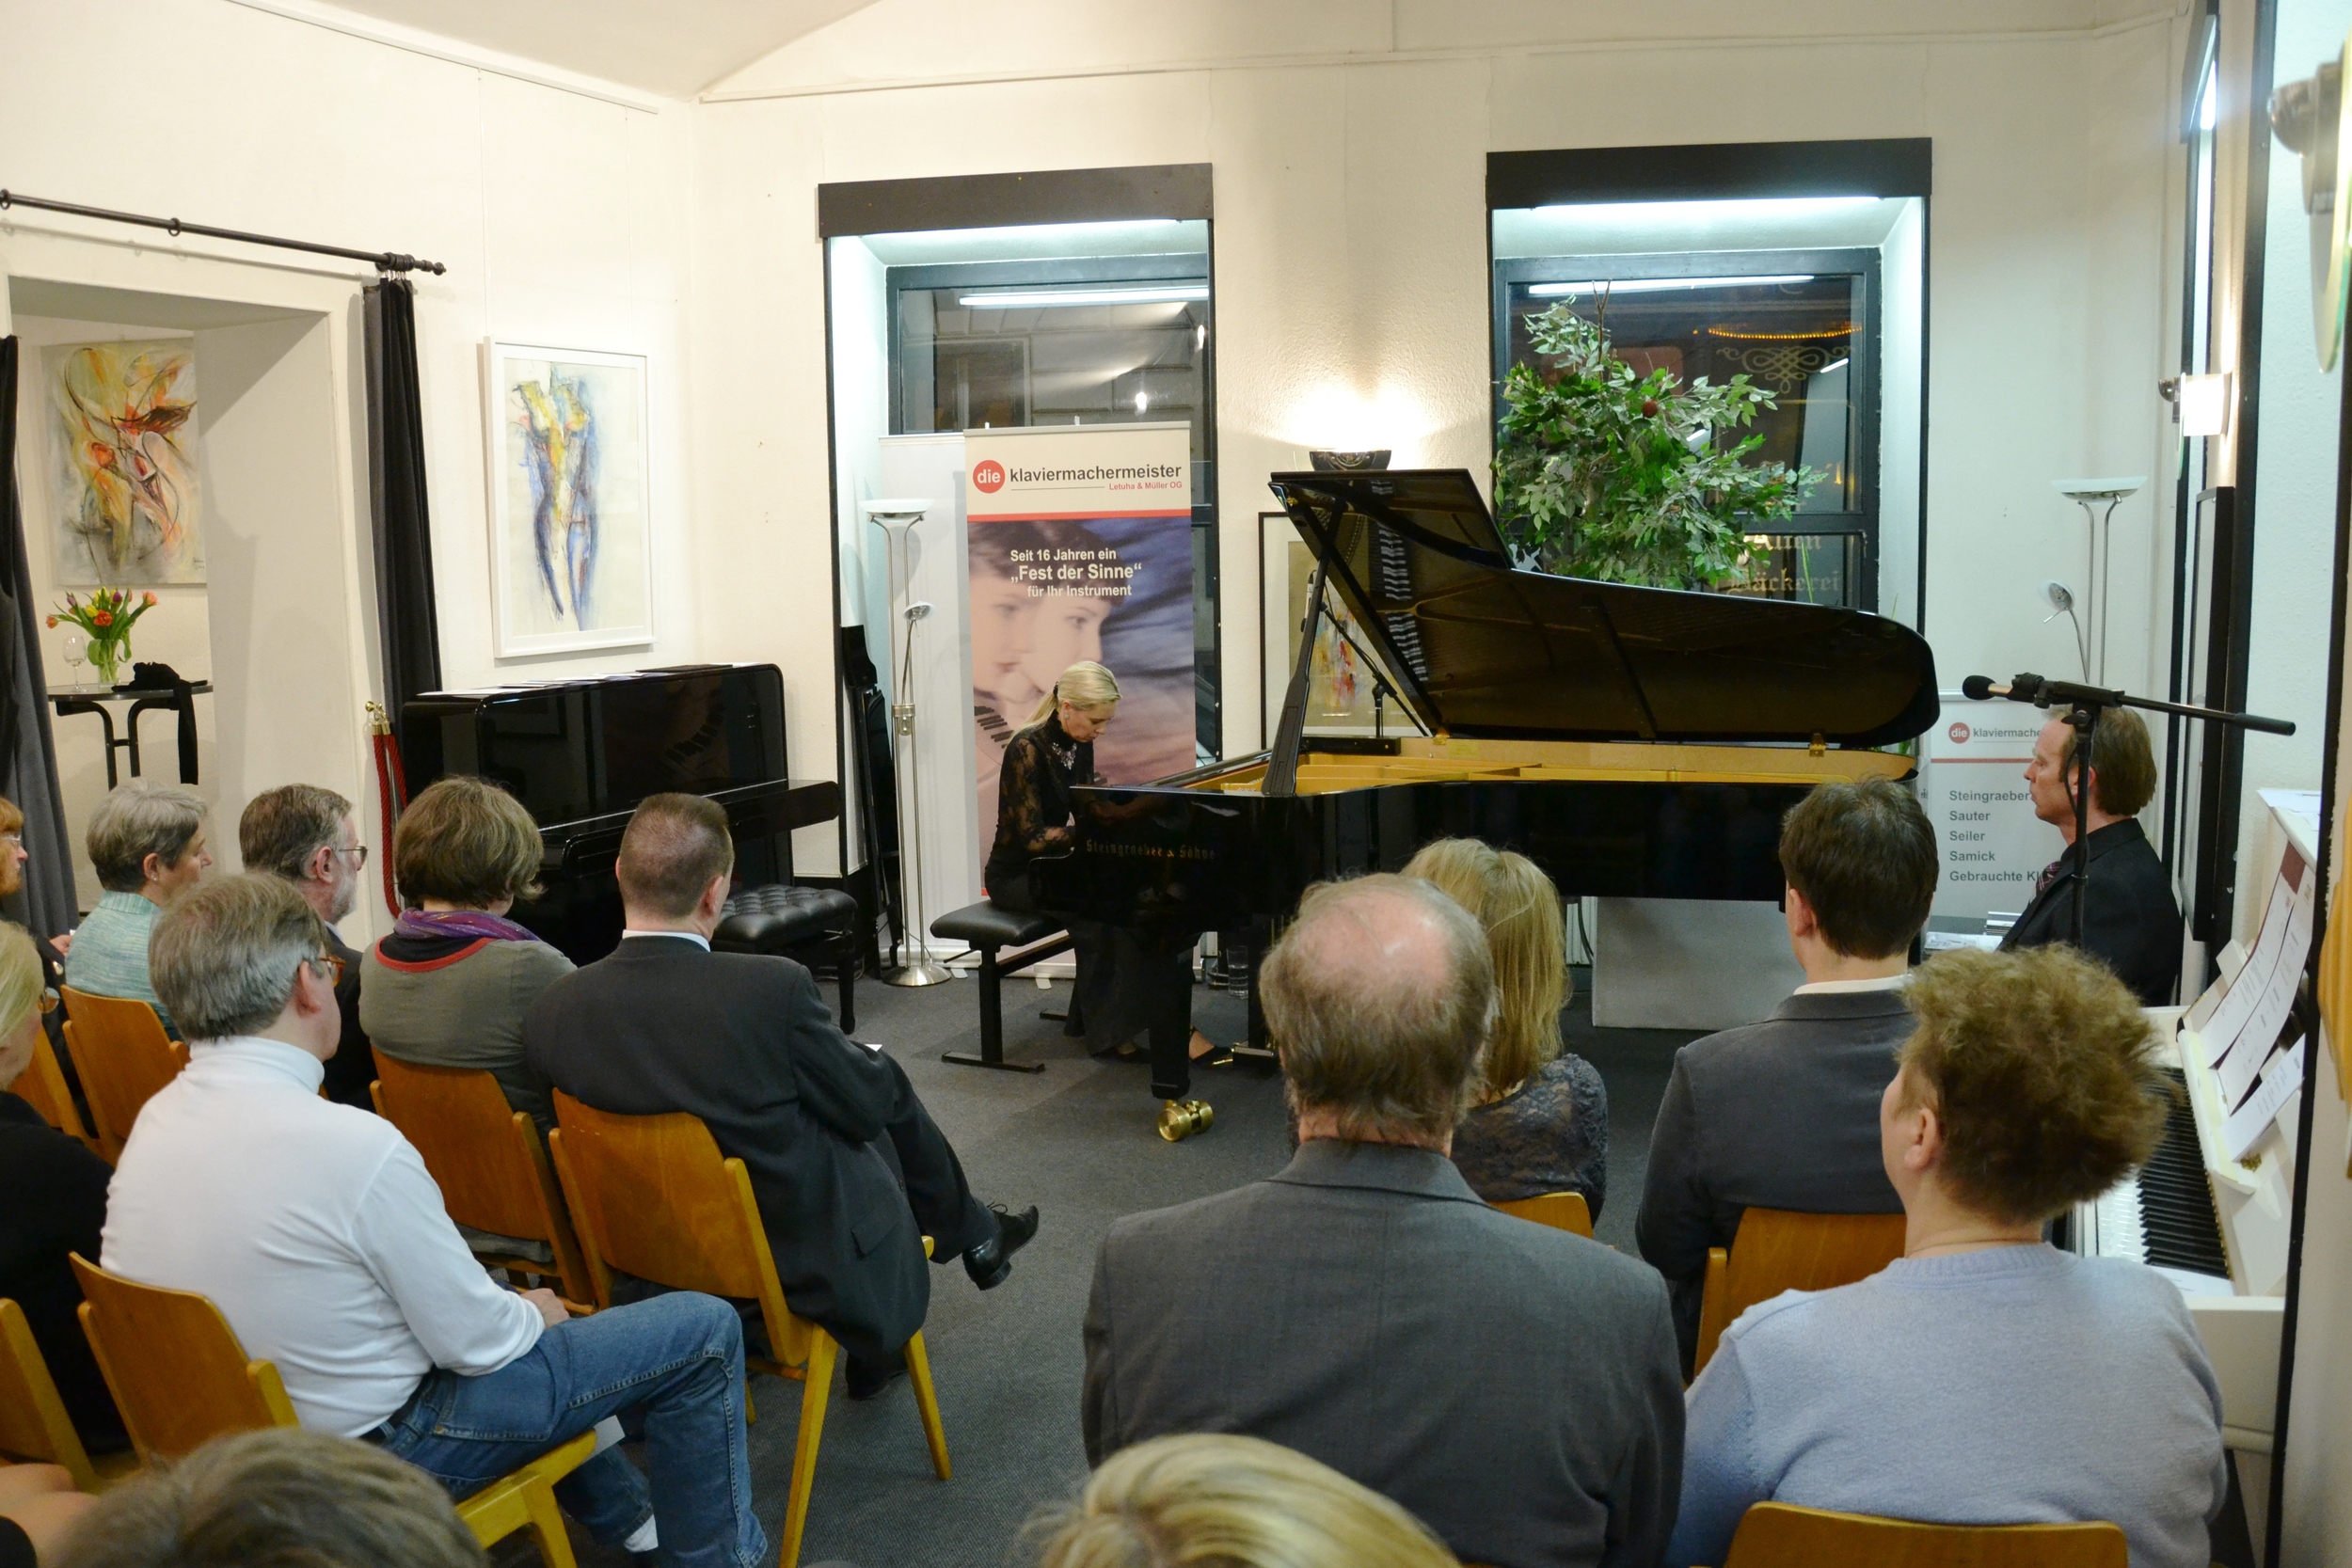  Ritzinger playing a piano concert in 2012, Photo: Ritzinger private archive 